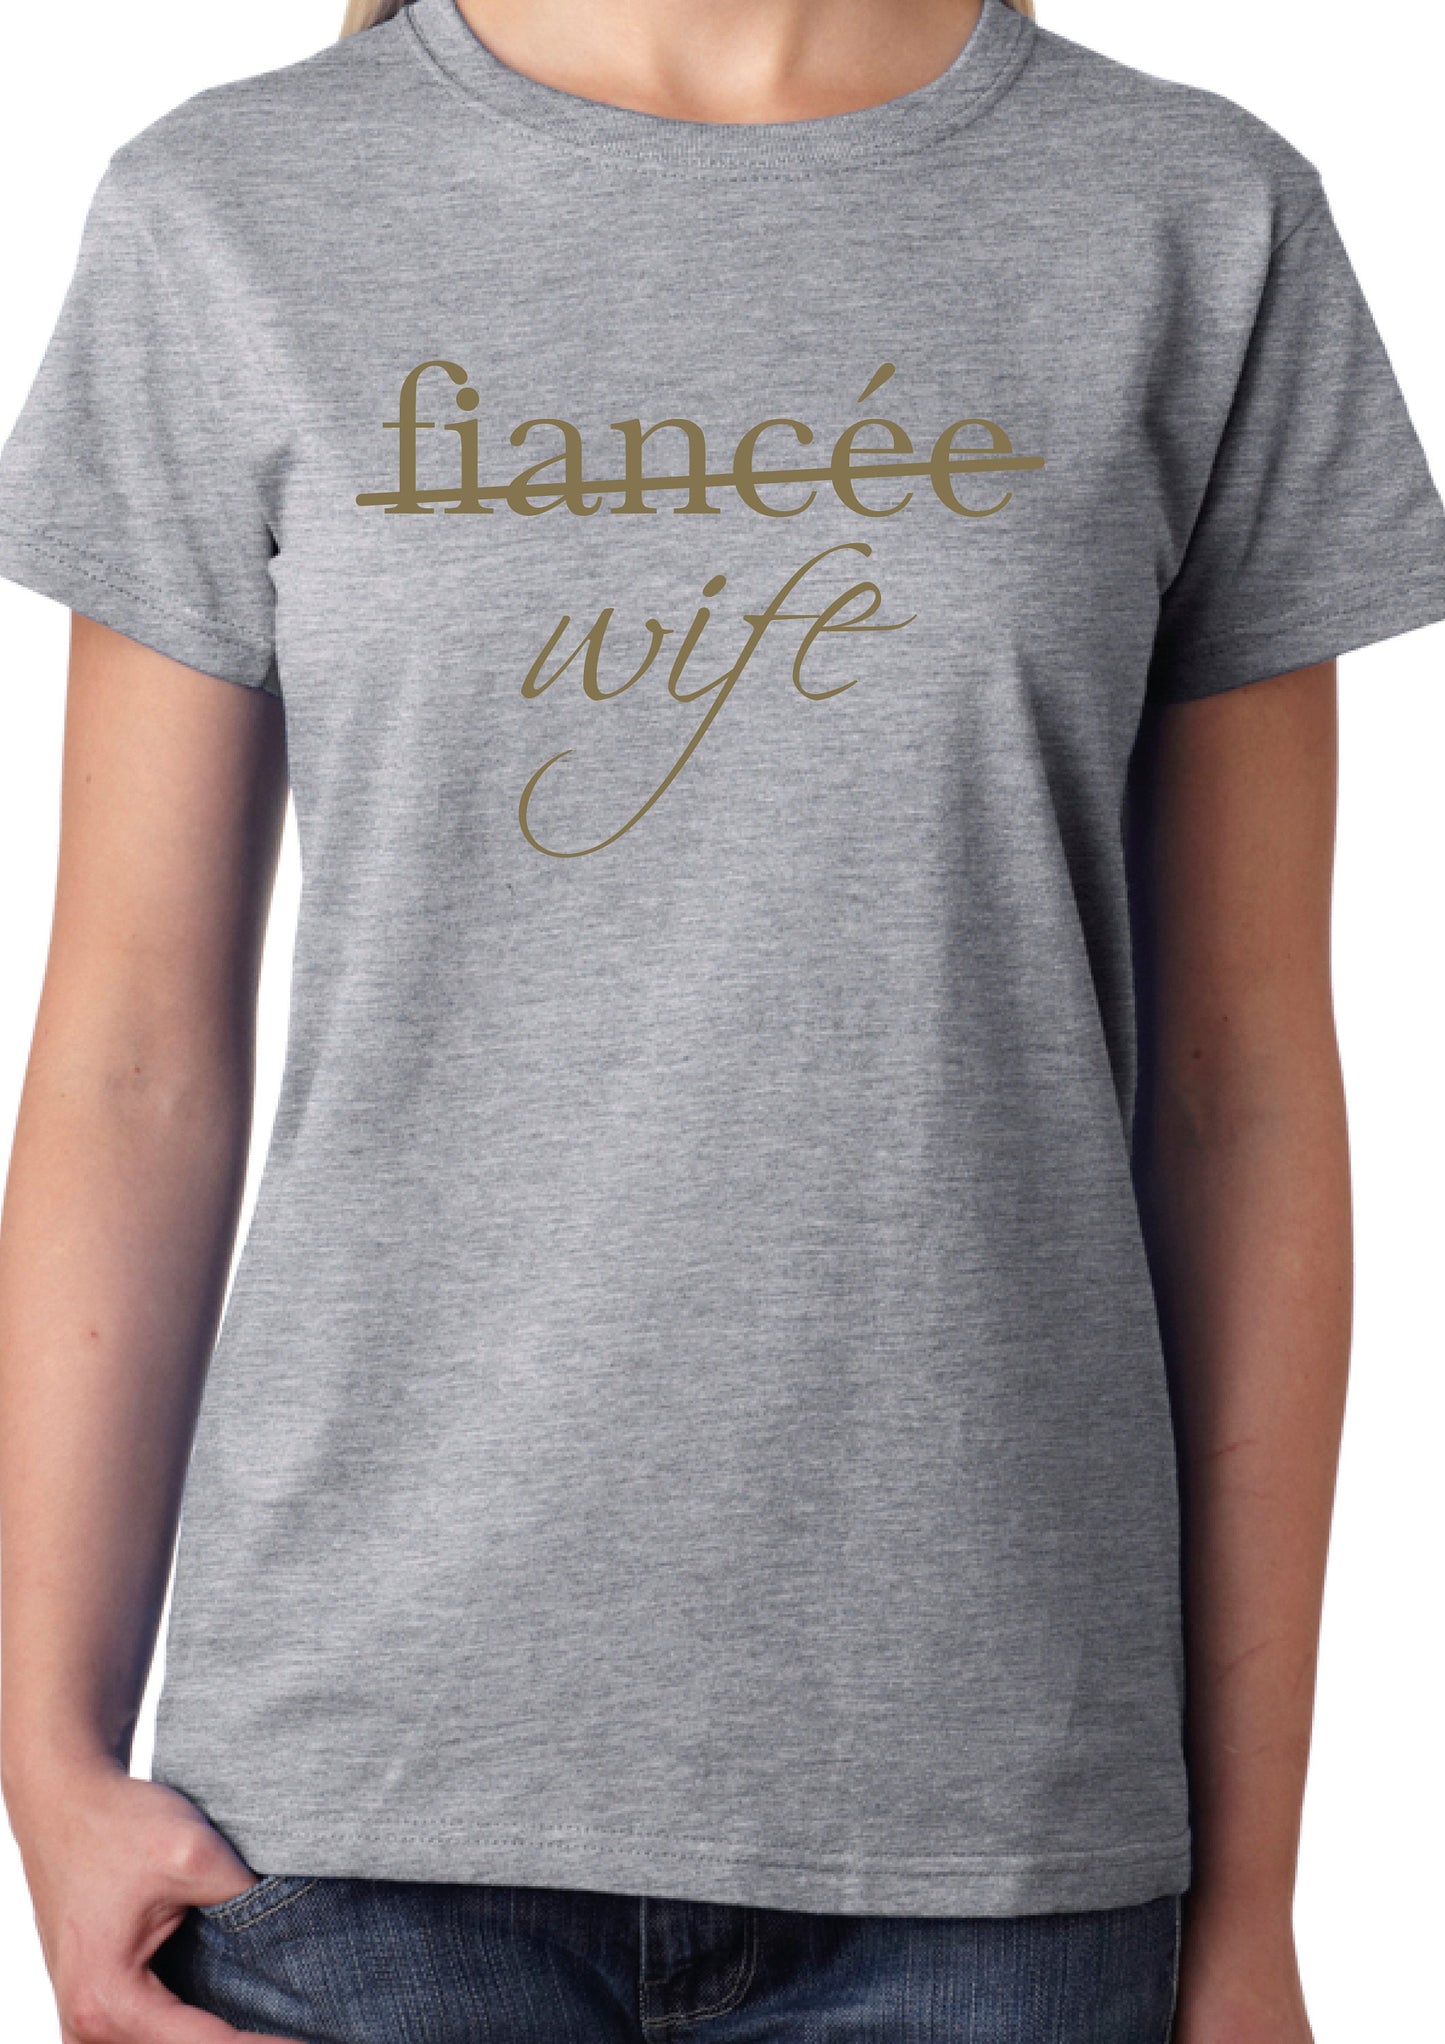 Fiance to Wife GOLD print T-Shirt, Ladies or Unisex Funny Cool Wedding Gift